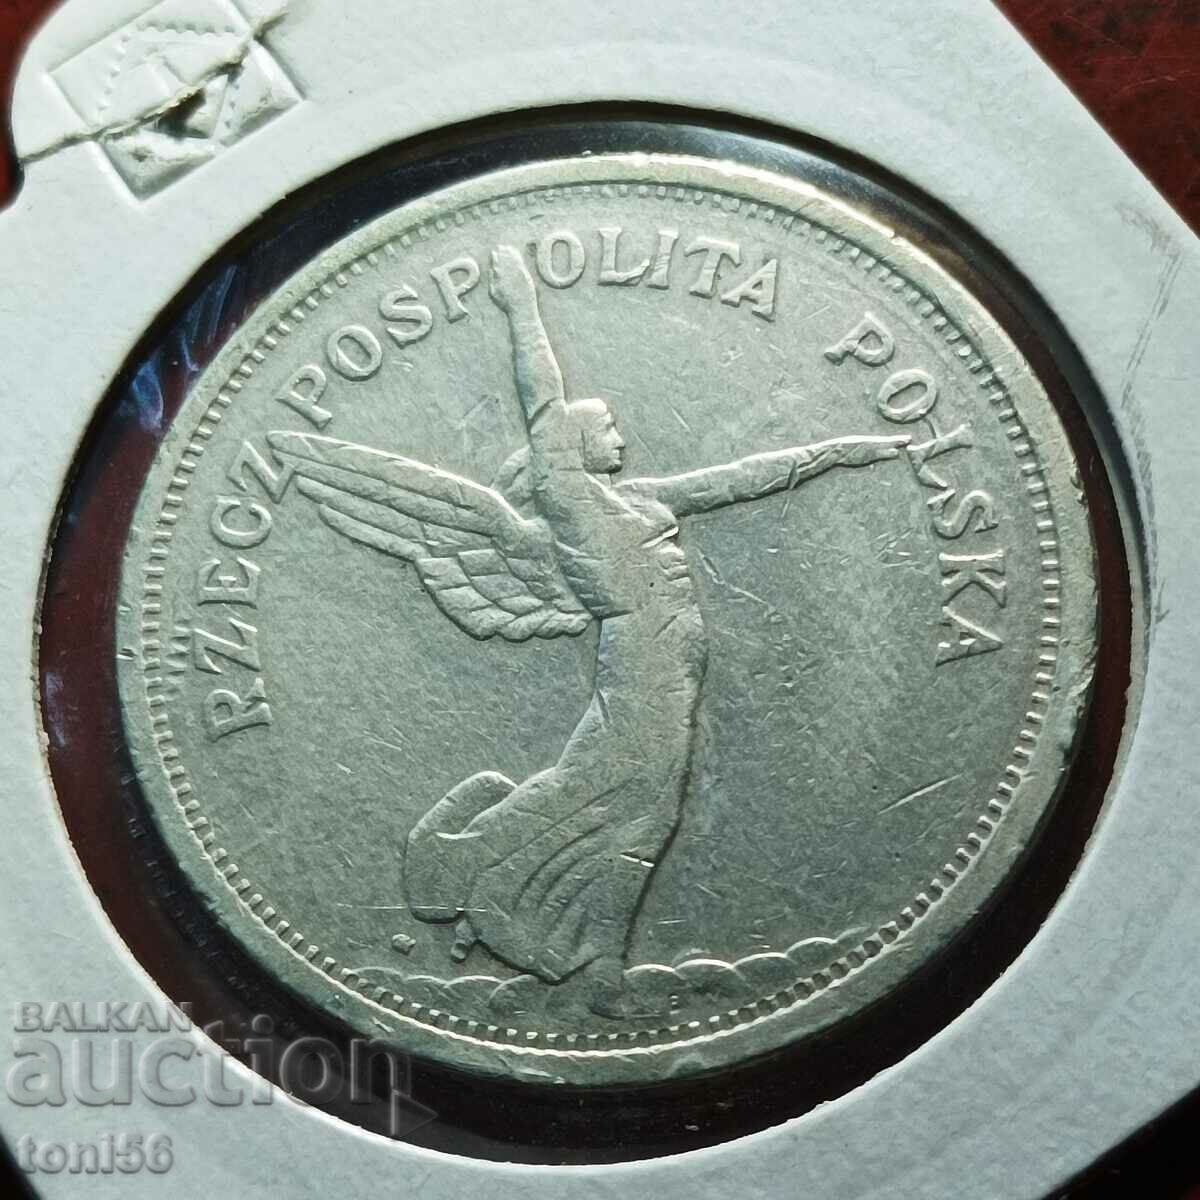 Poland 5 zlotys 1928 - silver, extremely rare